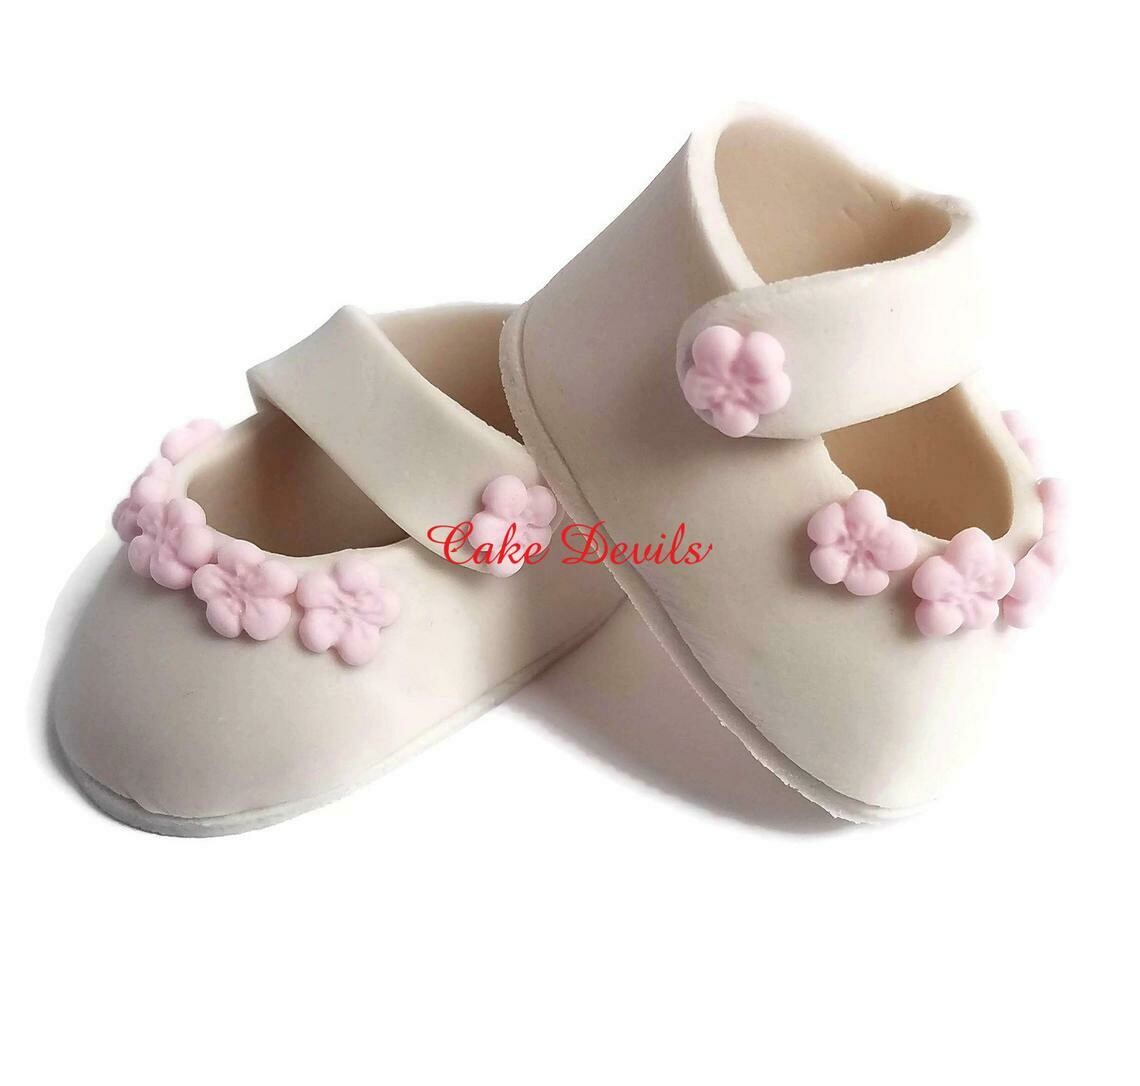 Baby Shower Shoes Cake Topper, Fondant Baby Booties with Flowers Cake Decorations